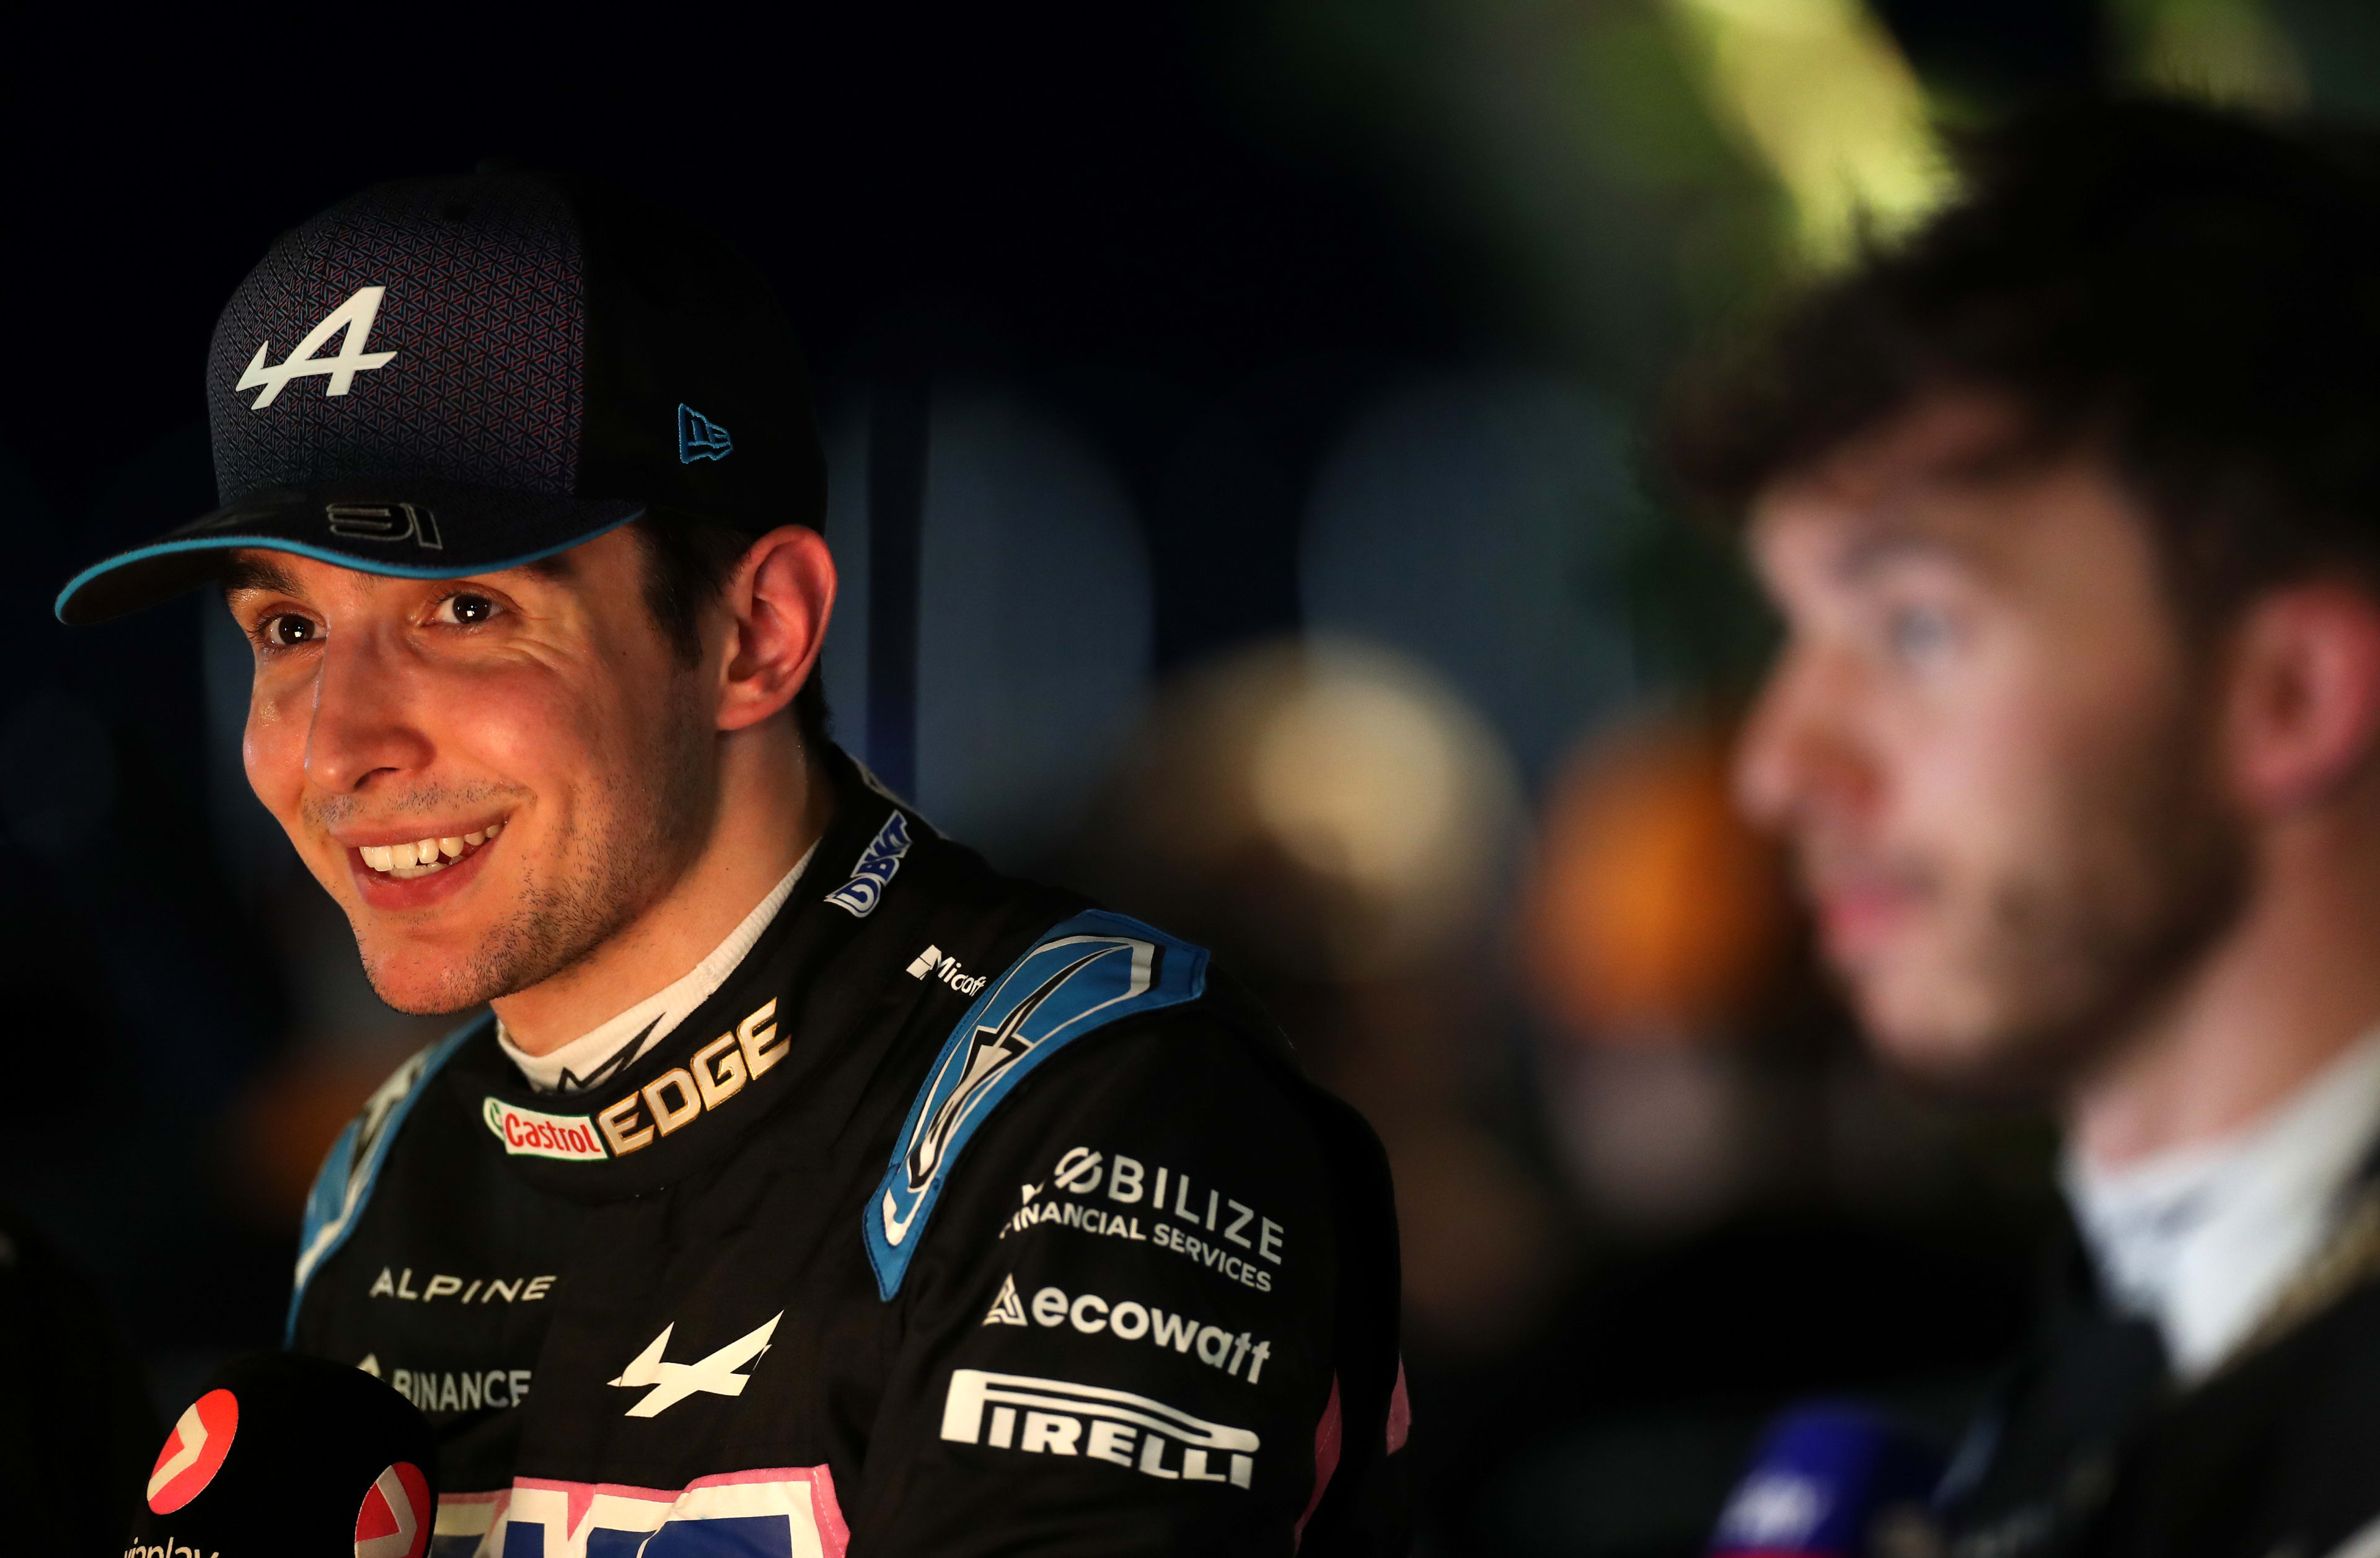 'We definitely want more' – Ocon and Gasly left with mixed emotions after 'lonely' race in the top-10 at Jeddah